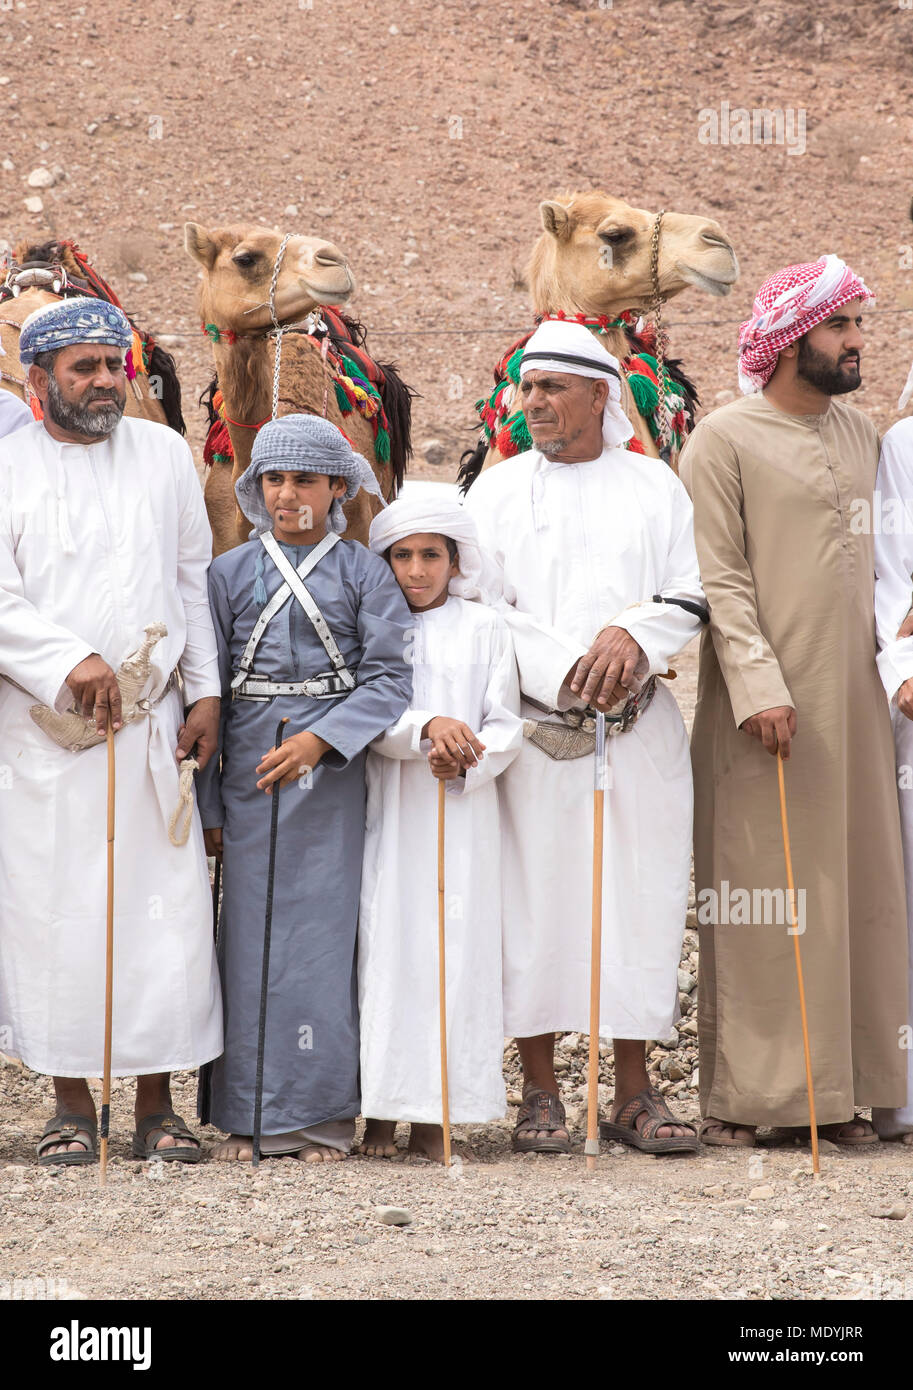 khadal, Oman,7th April 2018: omani men in traditional clothing, with their  camels, gathering to celebrate Eid Stock Photo - Alamy